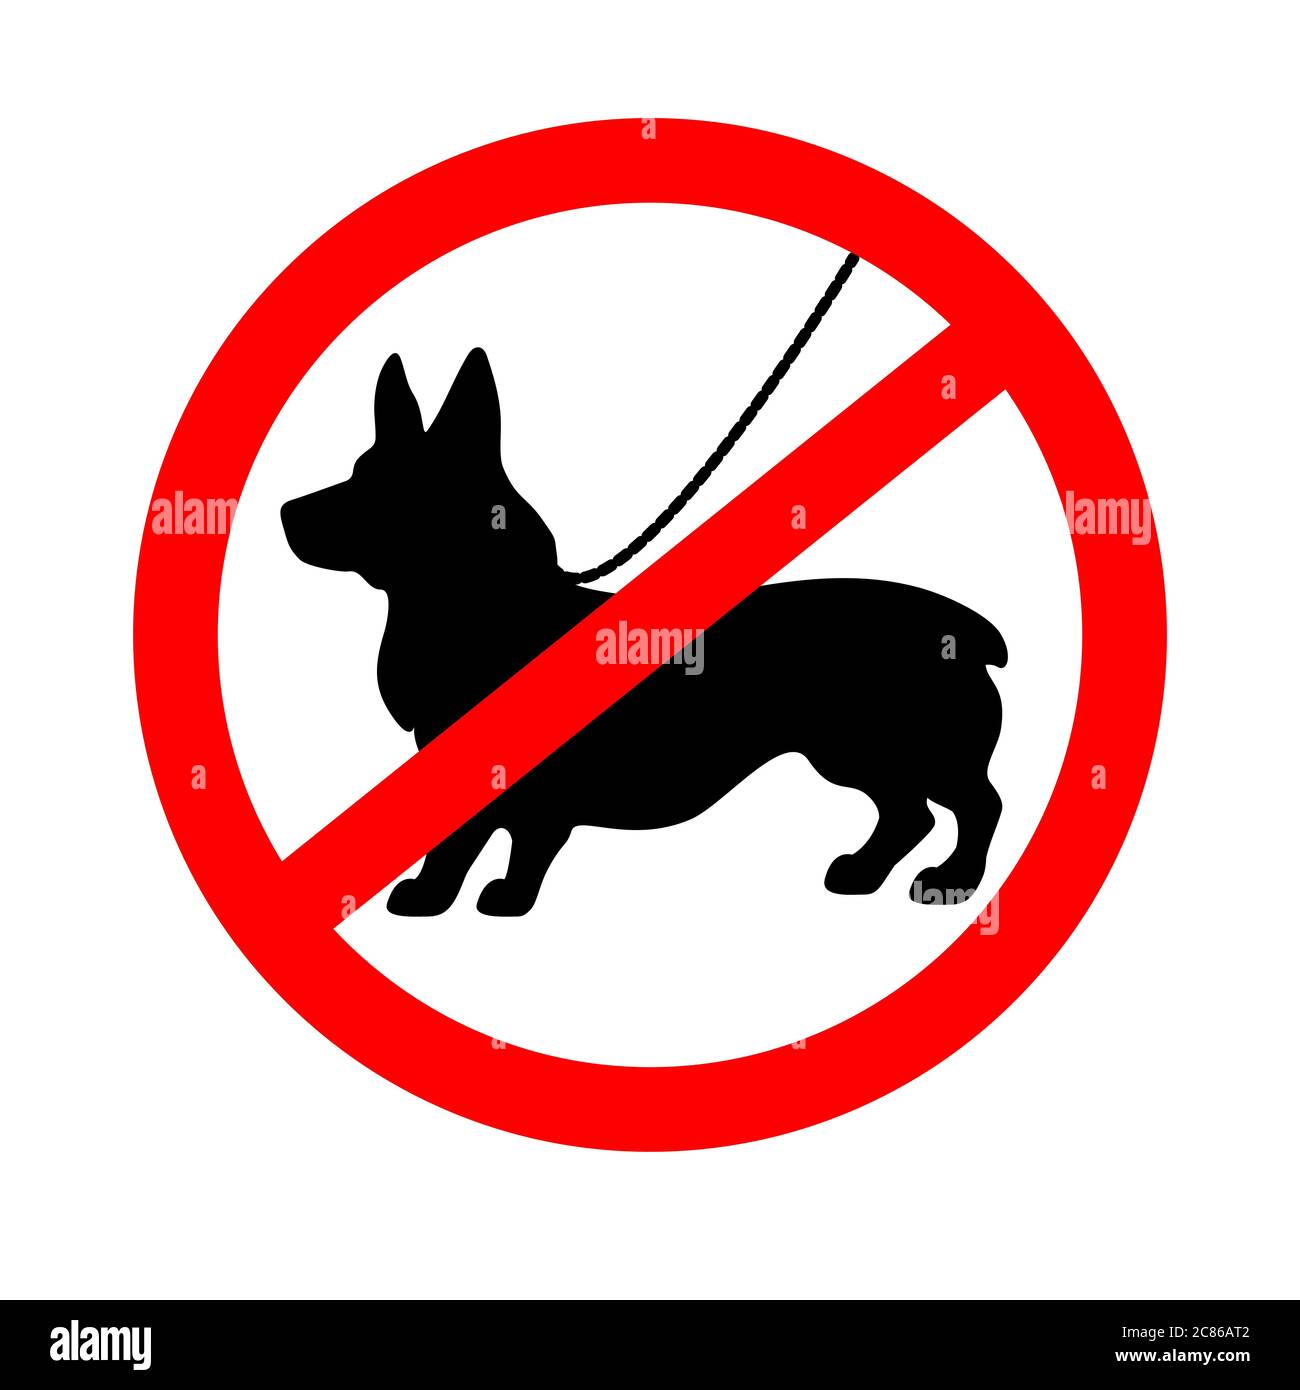 Sign prohibiting entry with a dog. No dogs sign. Stock Vector